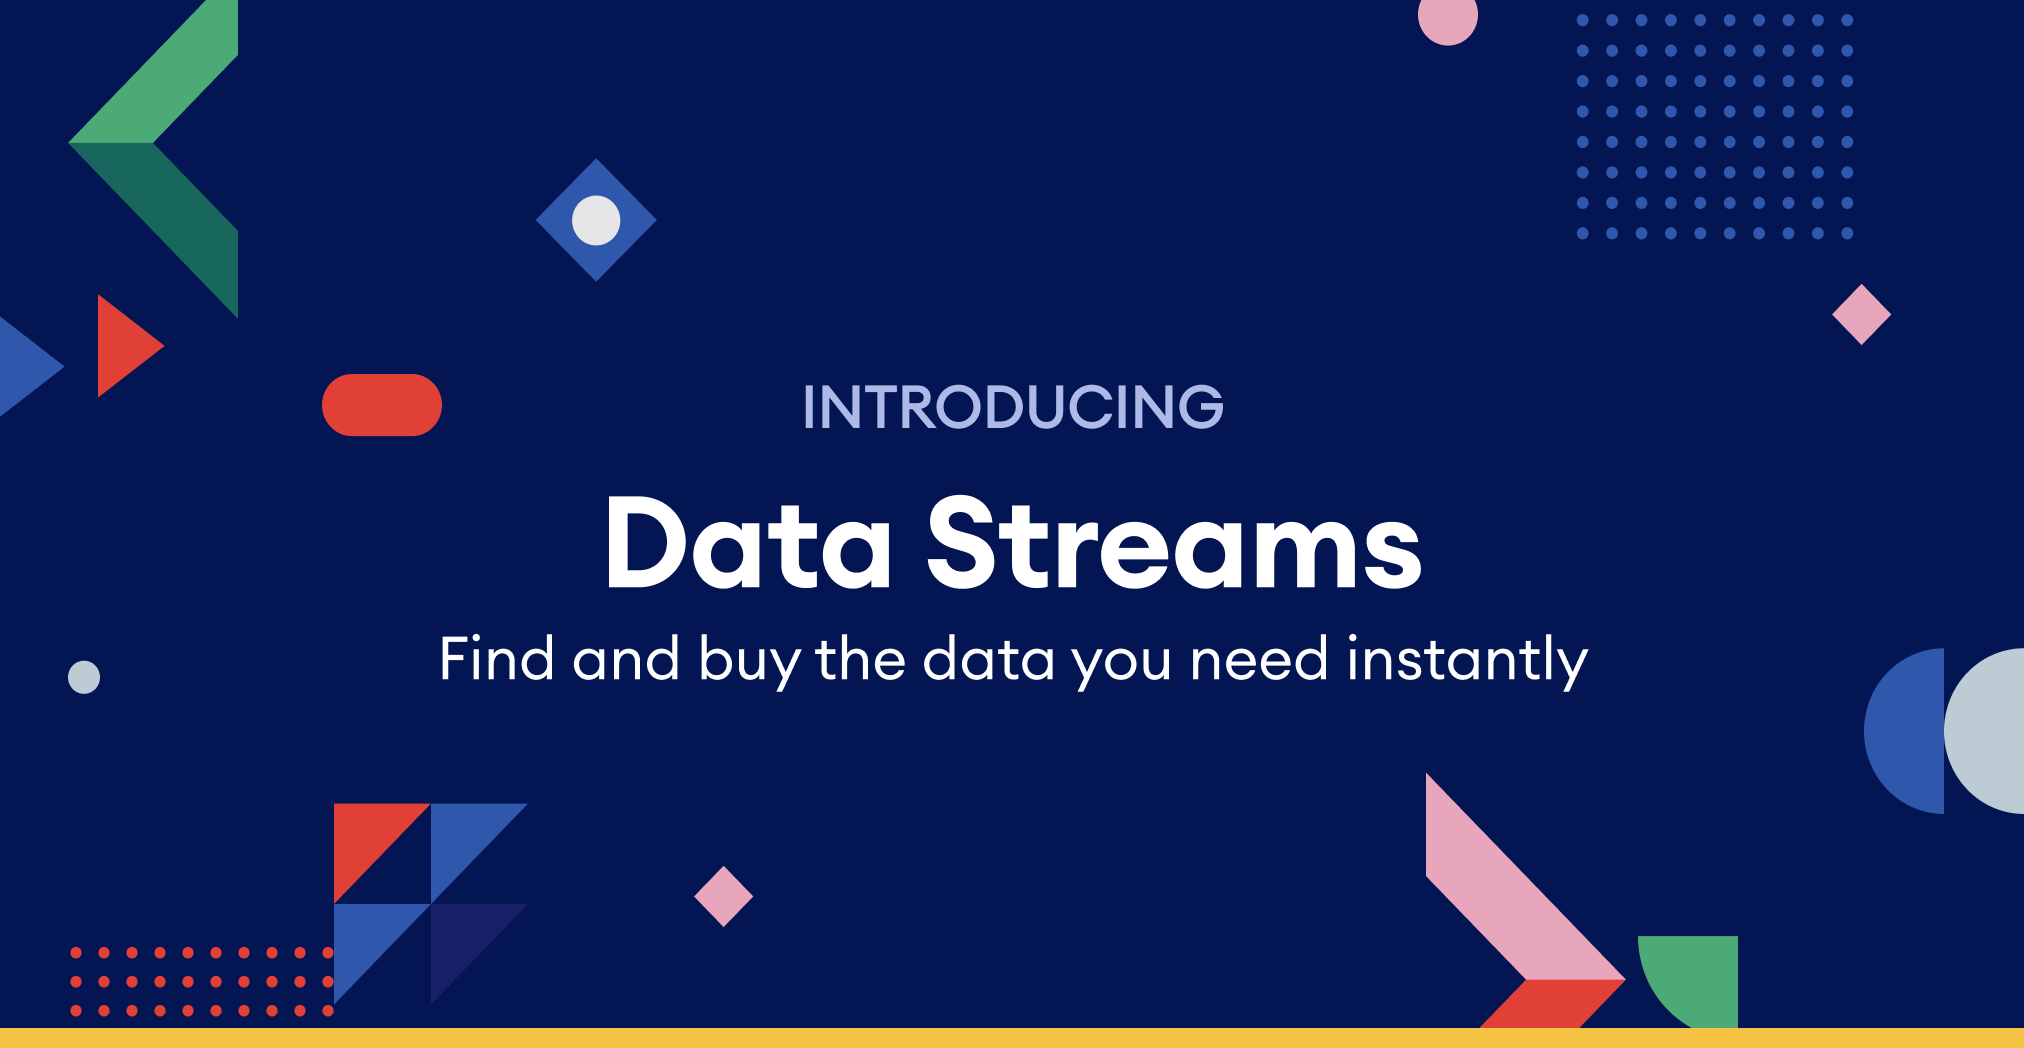 Find and buy data quickly and easily. Introducing Data Streams.